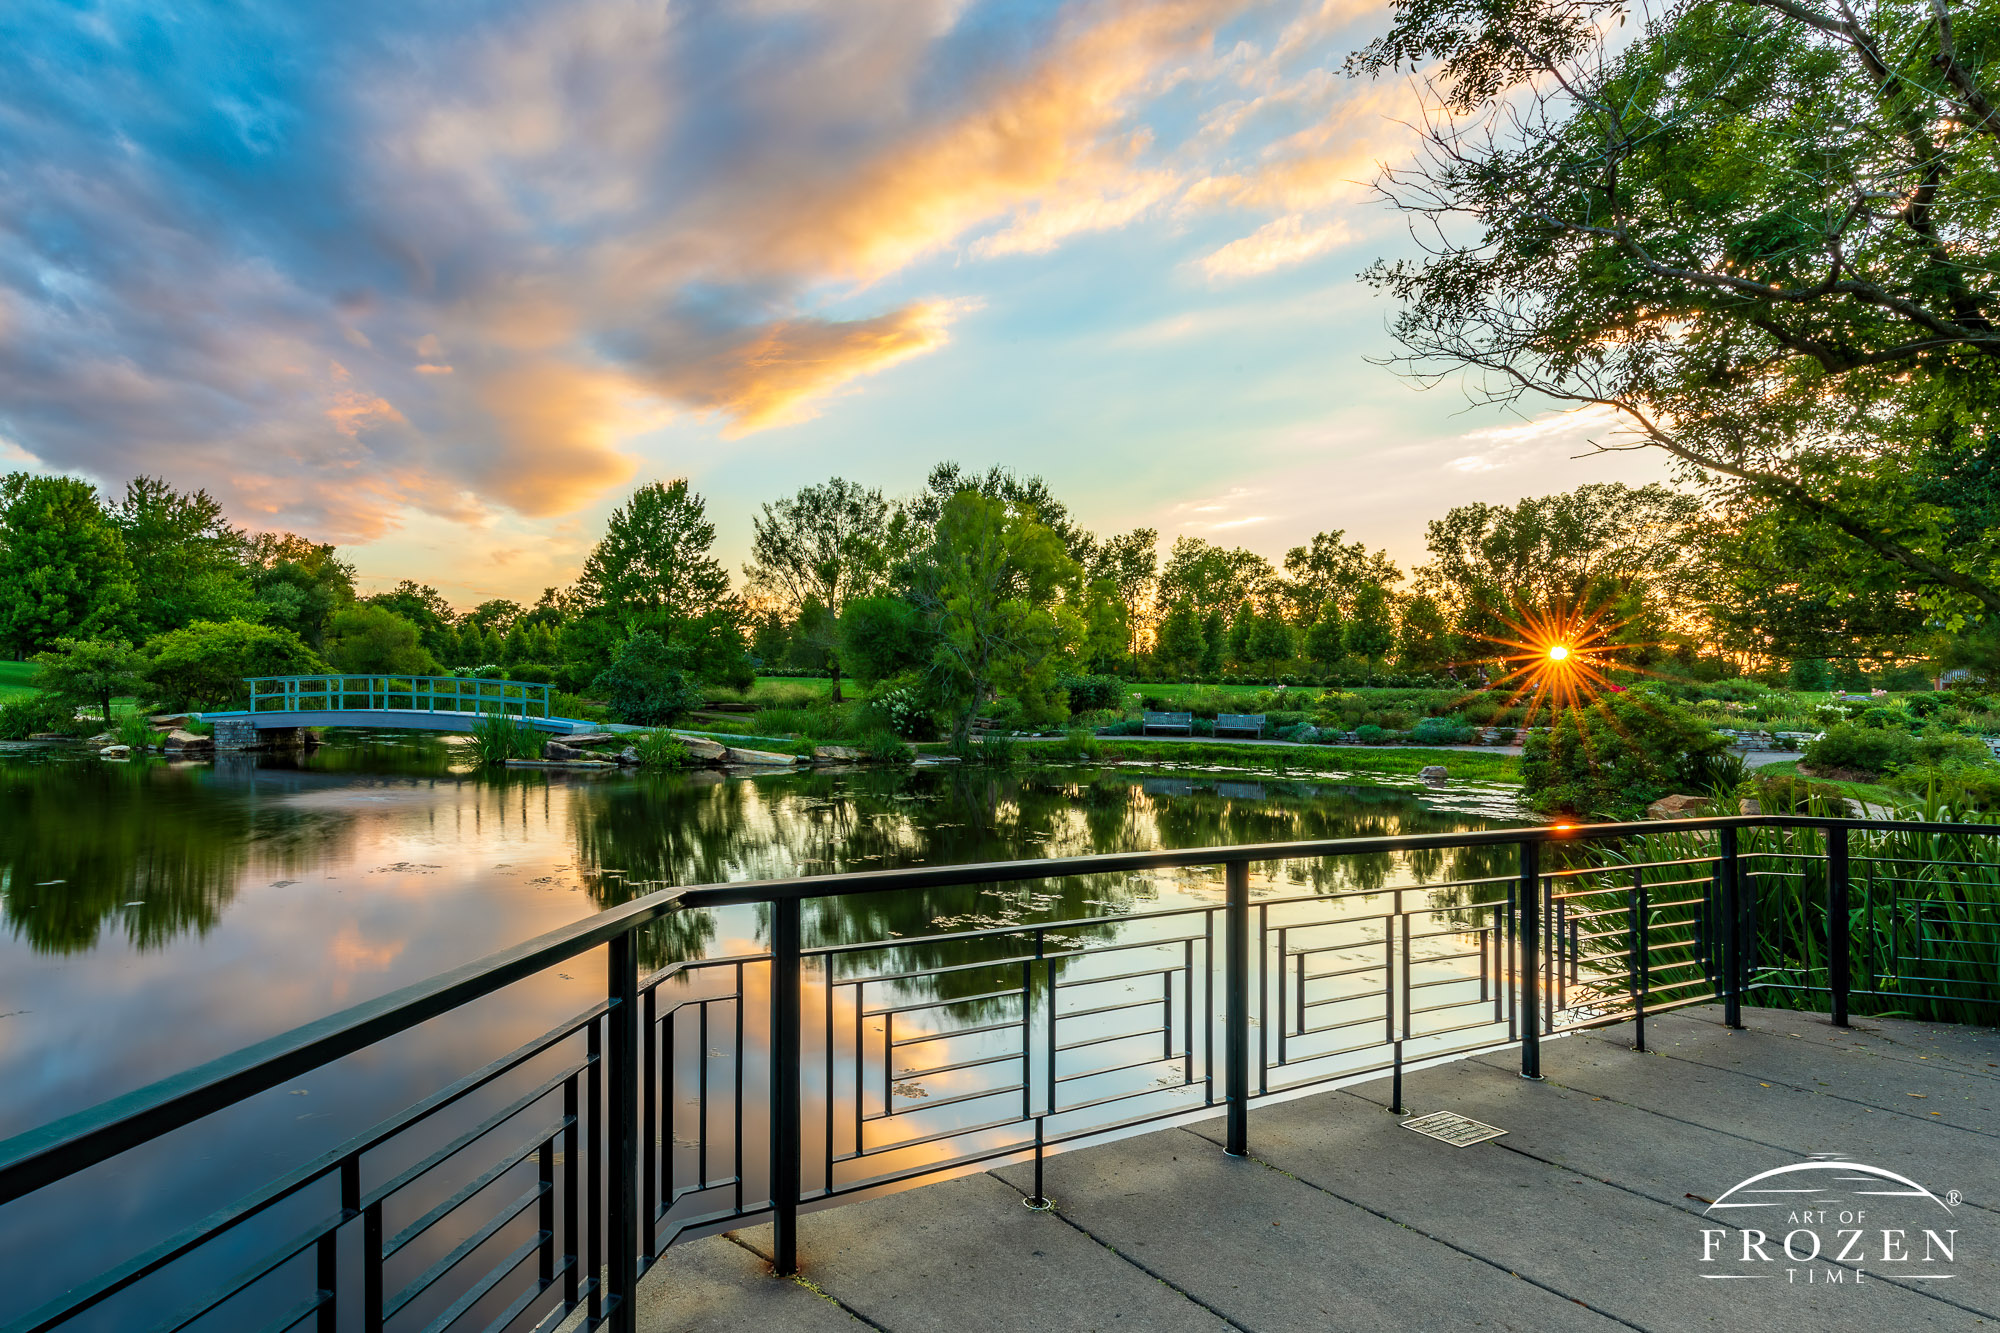 An evening view of Cox Arboretum MetroPark’s where the Money Bridge crossed the Water Garden as the park’s trees filter the setting sun